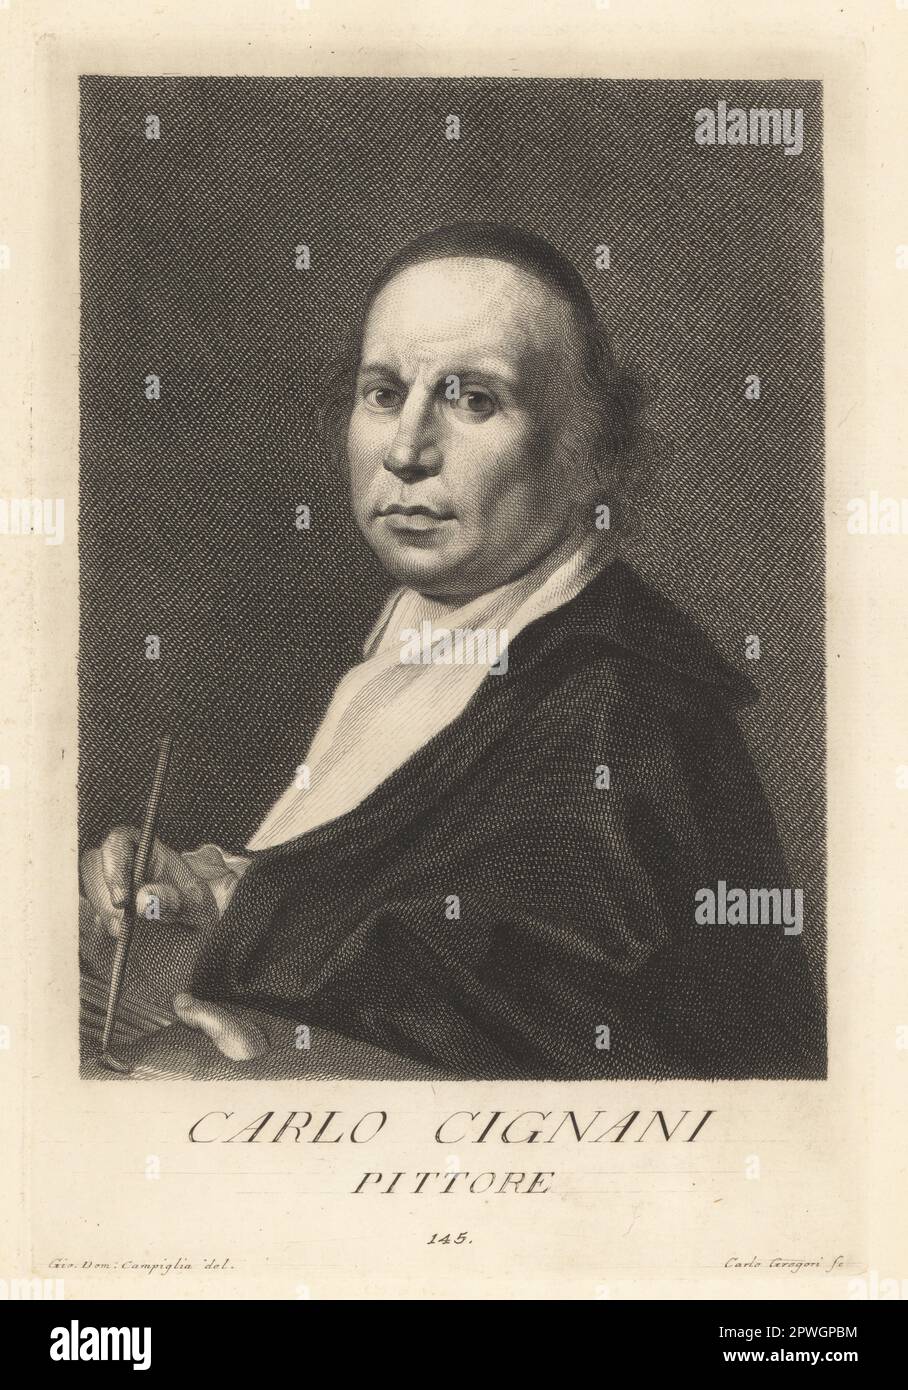 Carlo Cignani, Italian nobleman and Baroque painter of the Bolognese school, 1628-1719. Active in Bologna and Rome, working for Cardinal Farnese and the Archbishop of Milan. Conte Carlo Cignani, Pittore. Copperplate engraving by Carlo Gregori after Giovanni Domenico Campiglia after a self portrait by the artist from Francesco Moucke's Museo Florentino (Museum Florentinum), Serie di Ritratti de Pittori (Series of Portraits of Painters) stamperia Mouckiana, Florence, 1752-62. Stock Photo